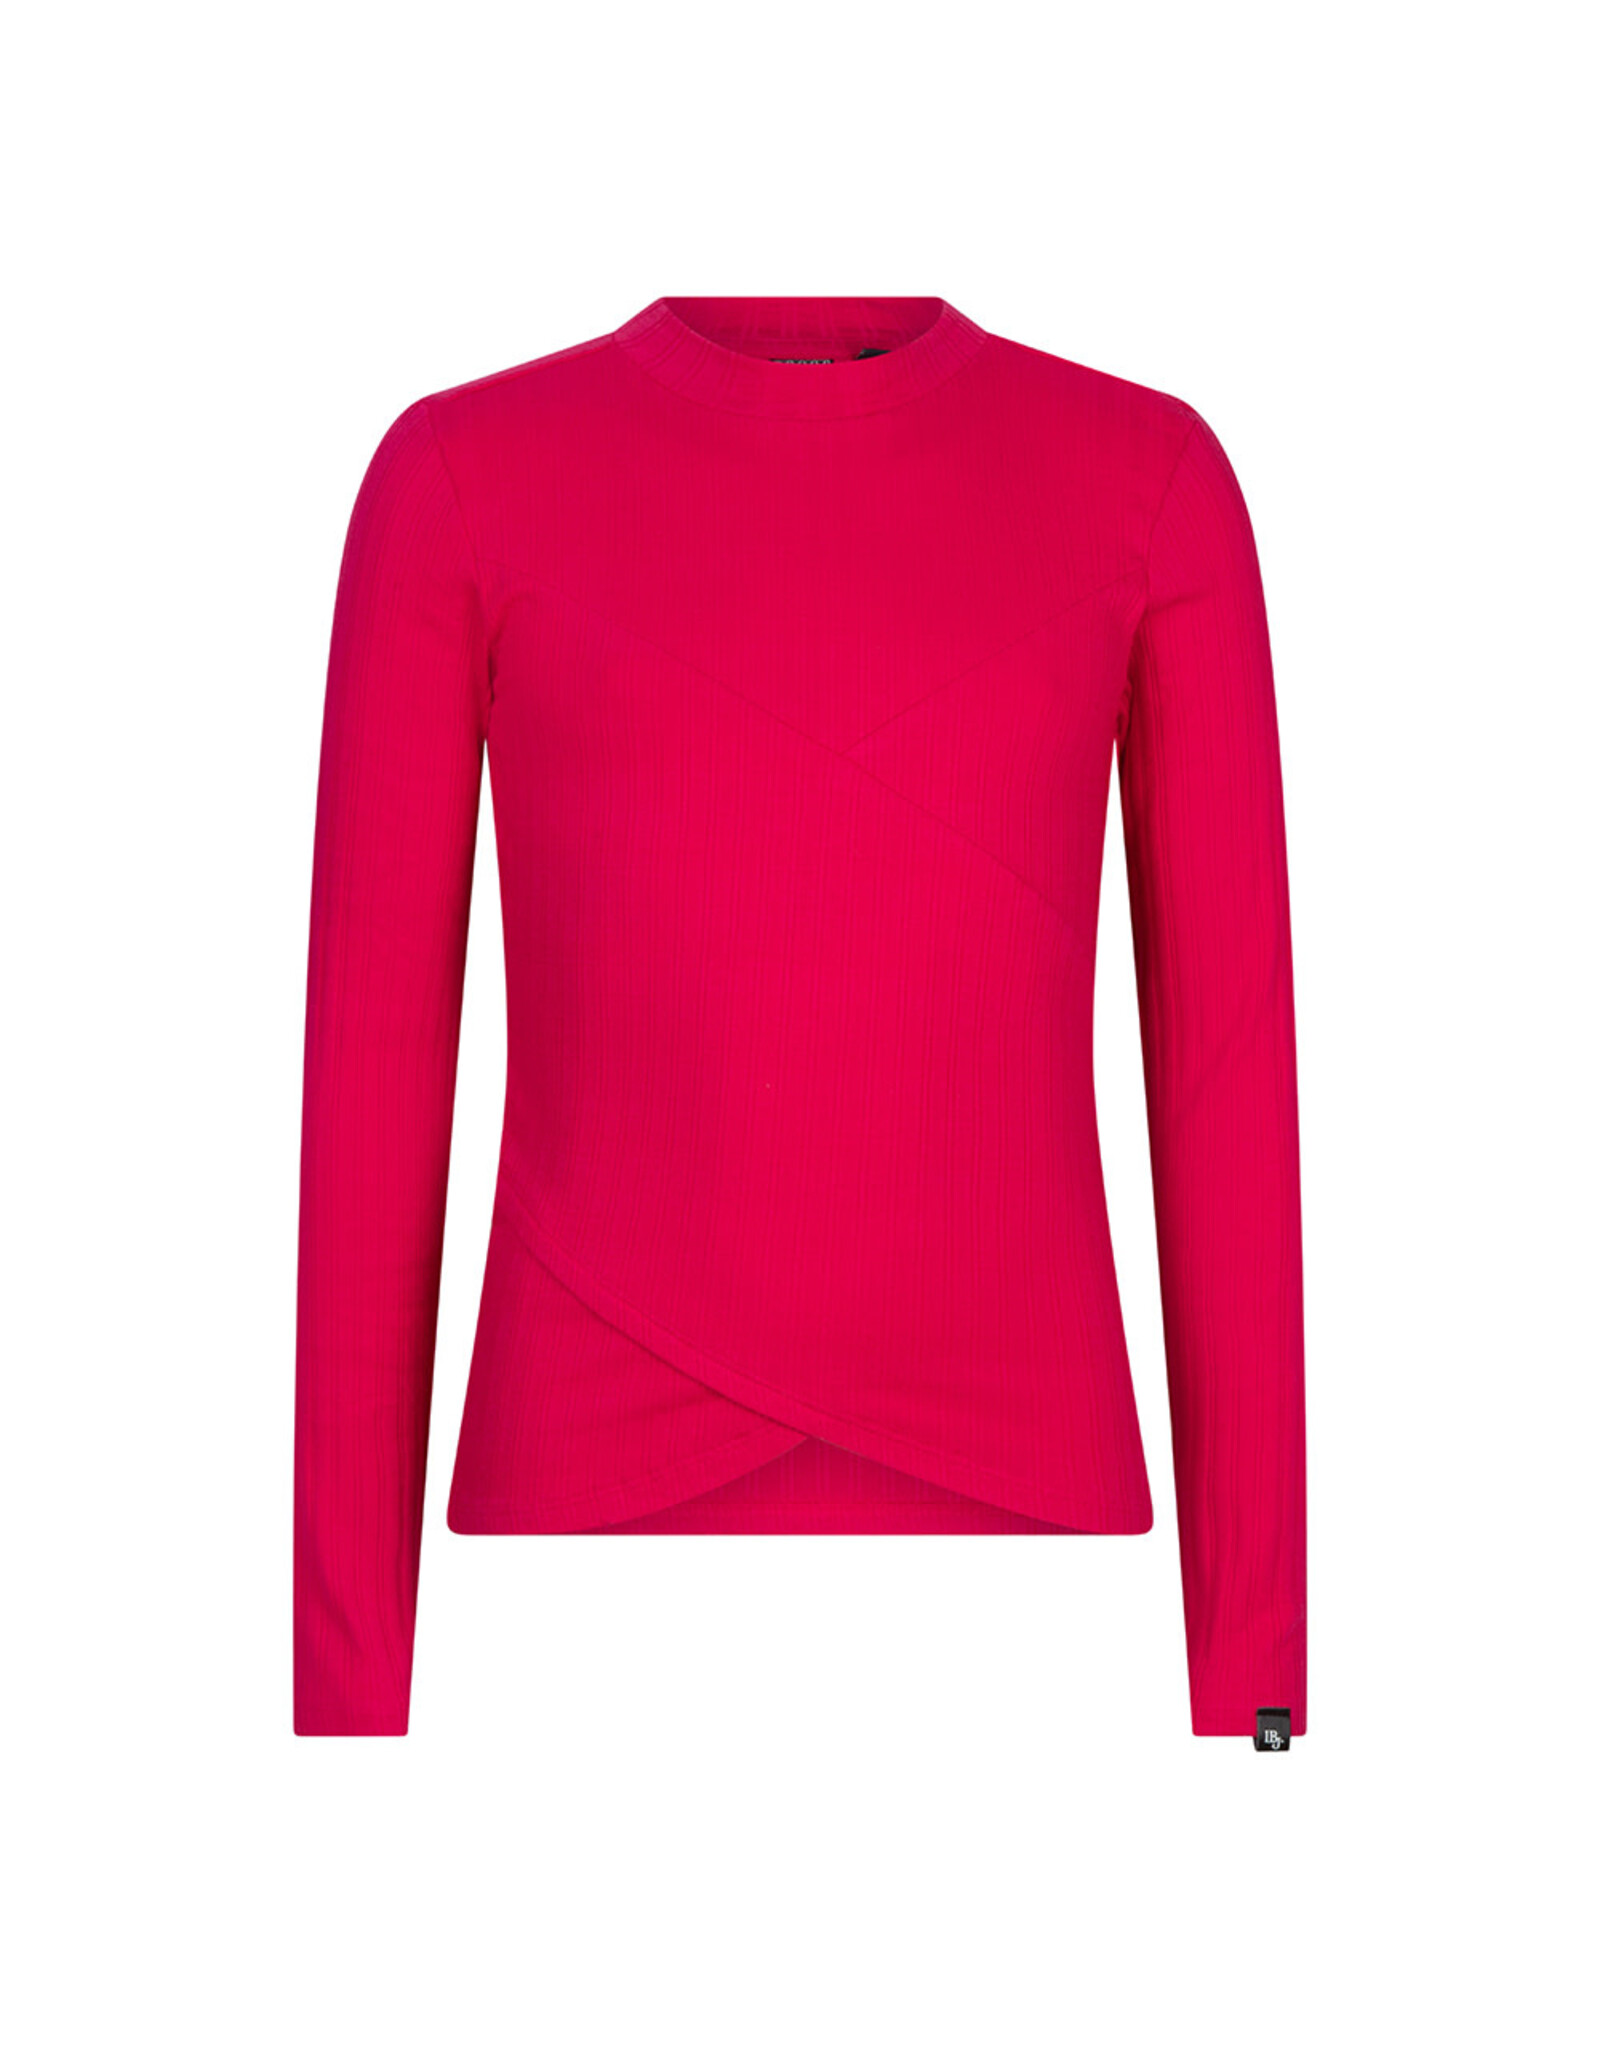 Indian Blue Jeans Long Sleeve Crossover Bright Magenta